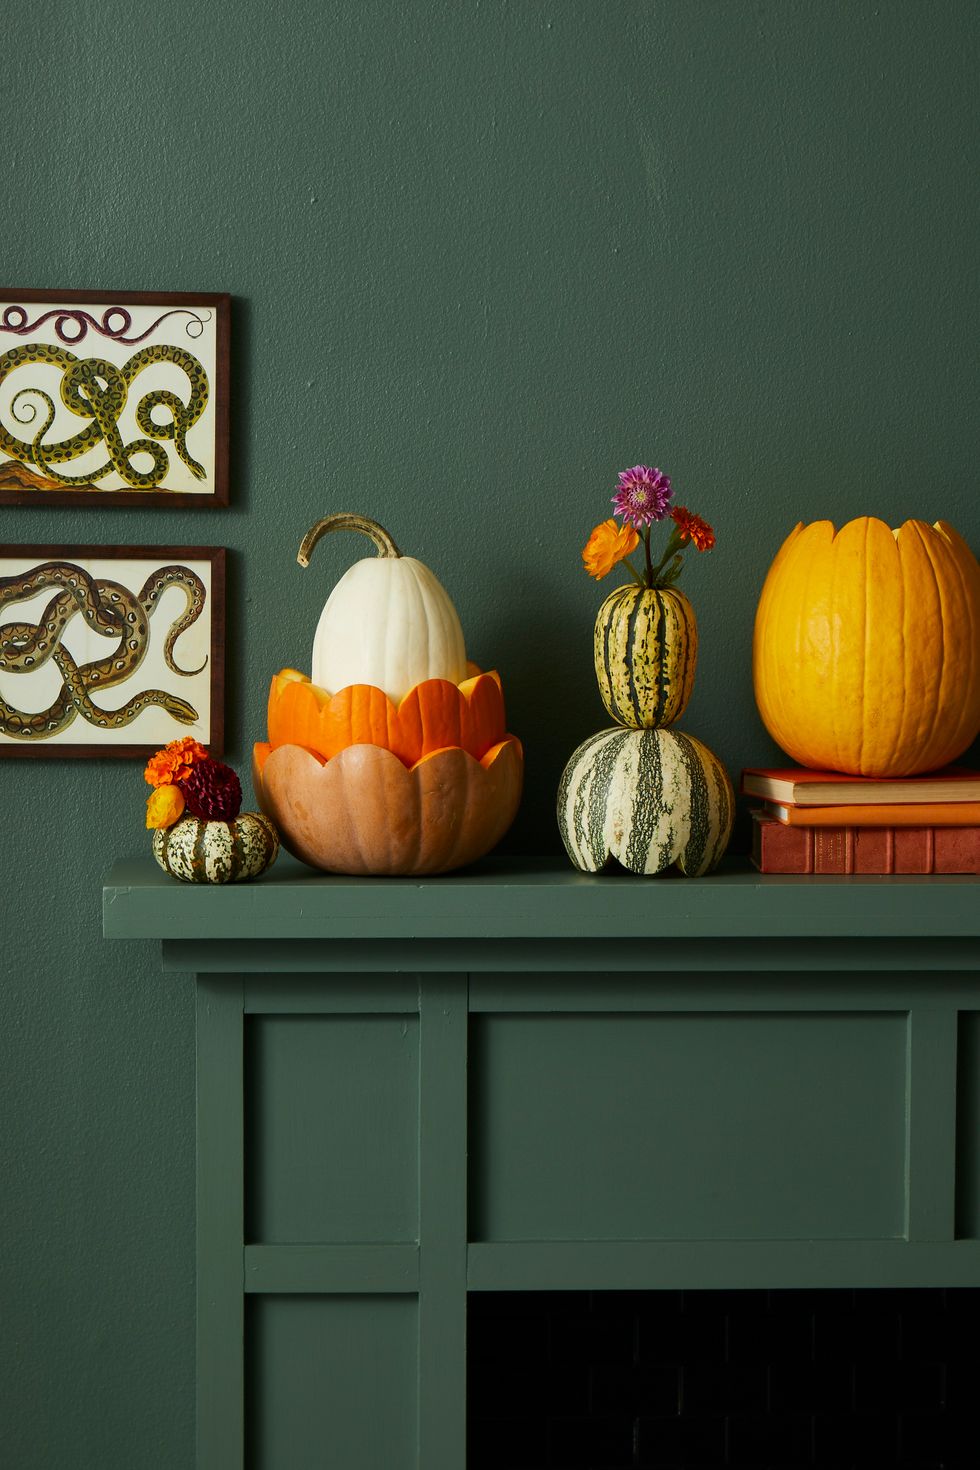 pumpkin carving ideas, pumpkins with scalloped edges on the mantel